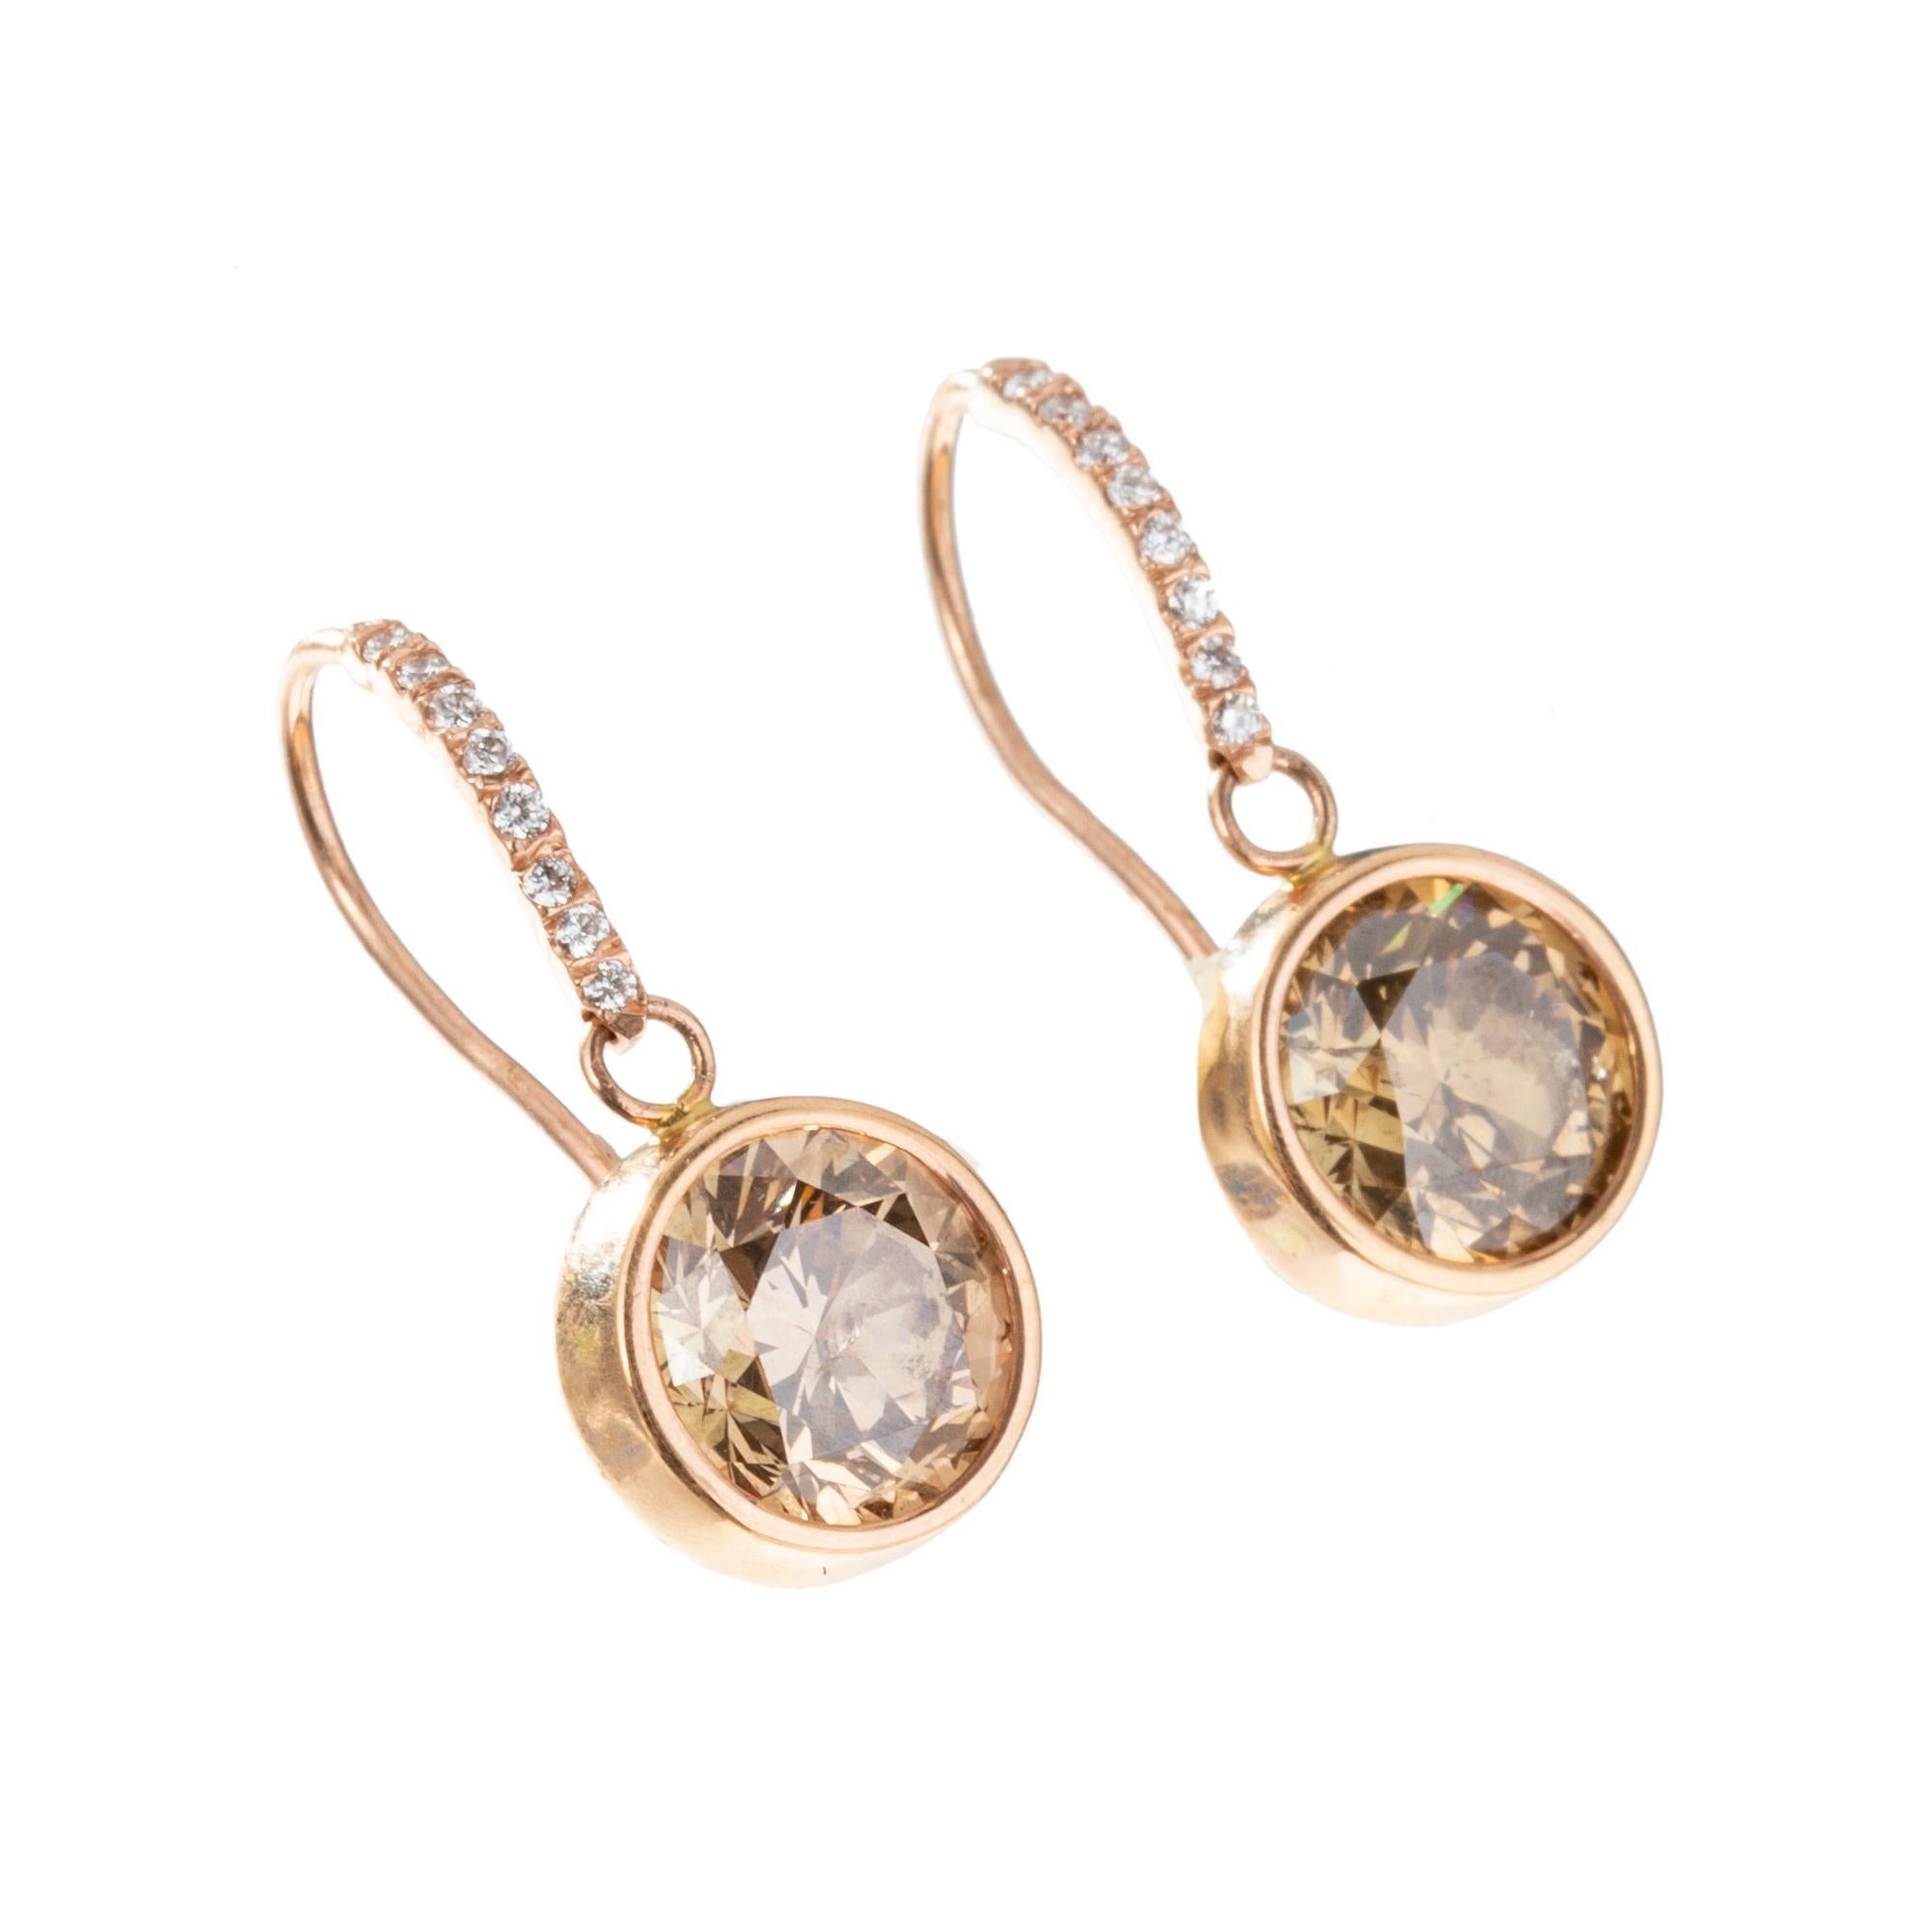 Drop earrings, featuring bezel-set round brilliant-cut brown diamonds suspended from a French wire accented by sixteen small round brilliant cut diamonds.  Handmade in 14k rose gold.  Two brown diamonds weighing approximately 5.00 total carats. 